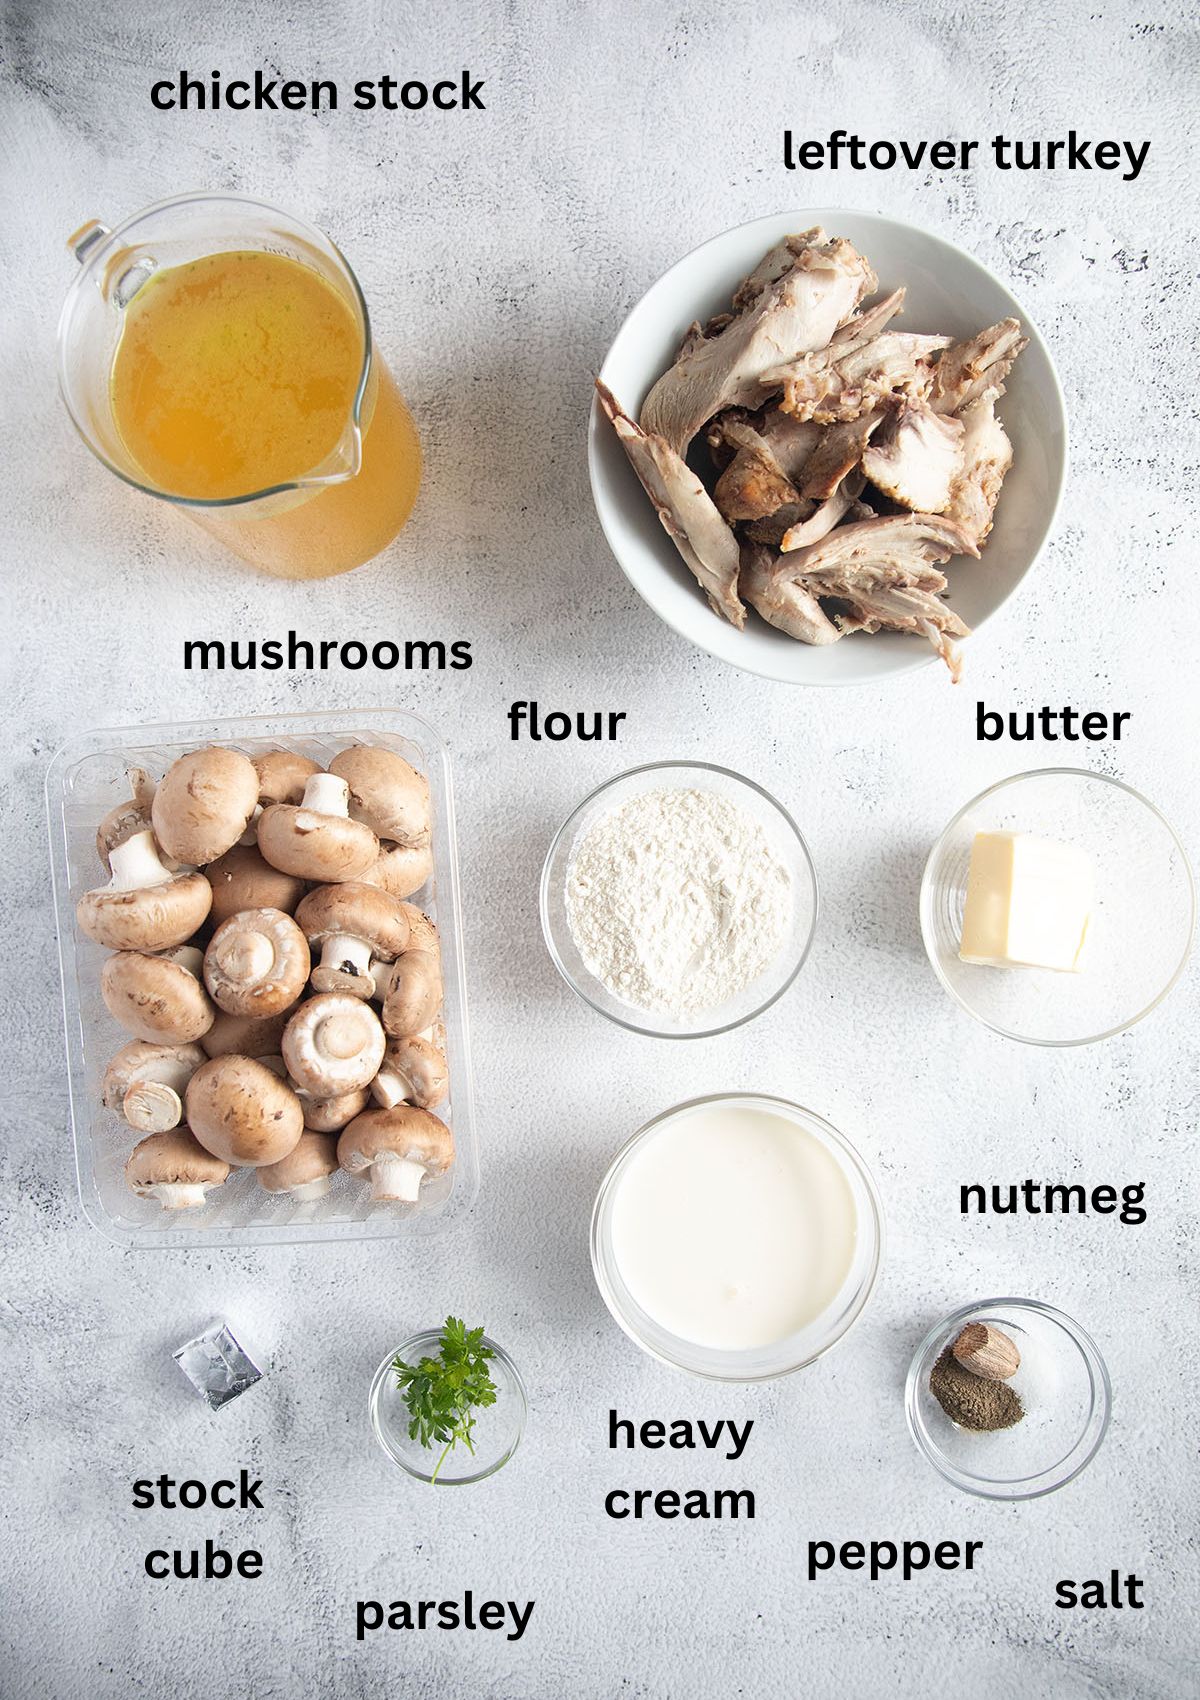 listed ingredients for making fricassee with leftover turkey, mushrooms, stock and cream.